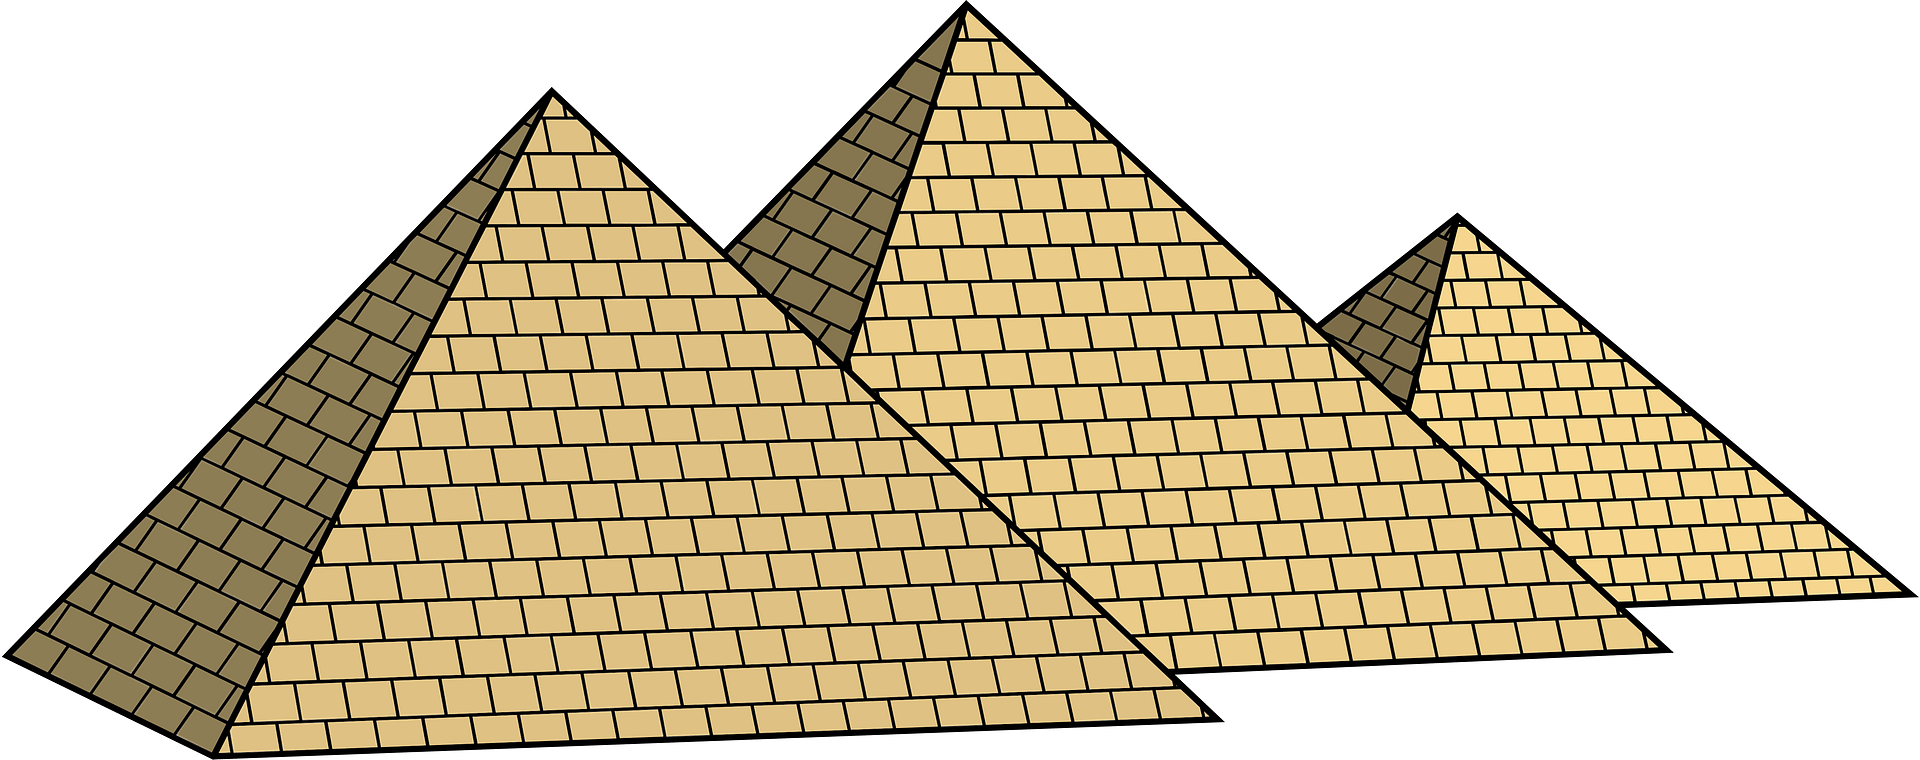 Egyptian pyramid clipart design illustration 9391125 PNG - Clip Art Library